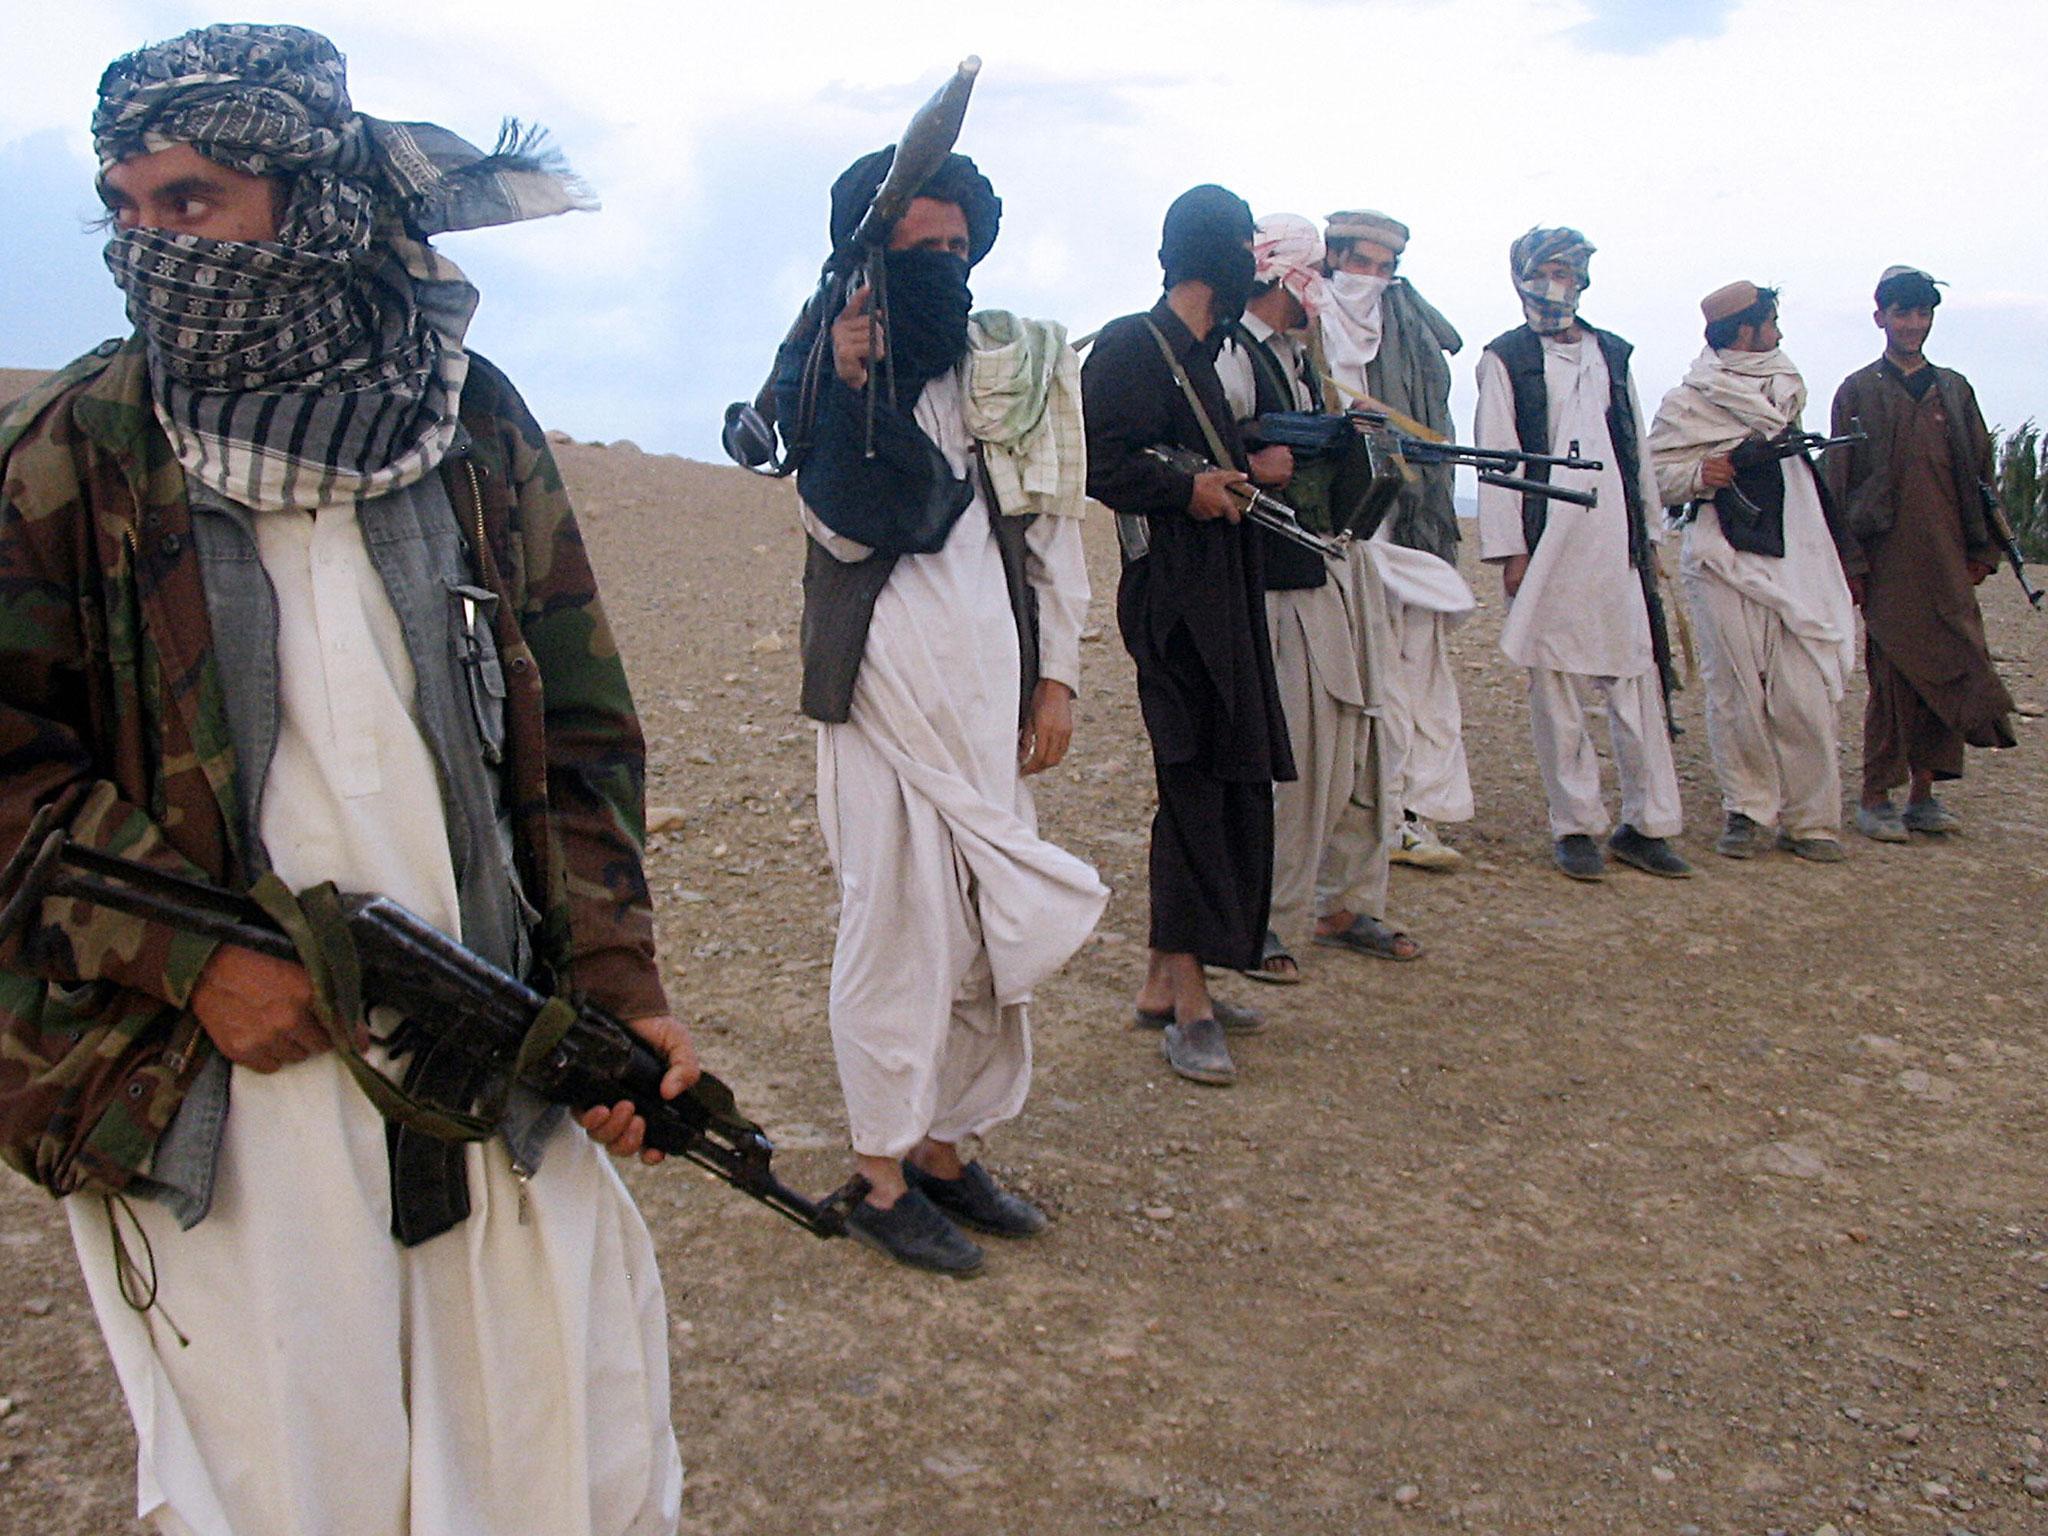 (FILE IMAGE) Obama failed to defeat the Taliban despite having at one point 100,000 troops in Afghanistan